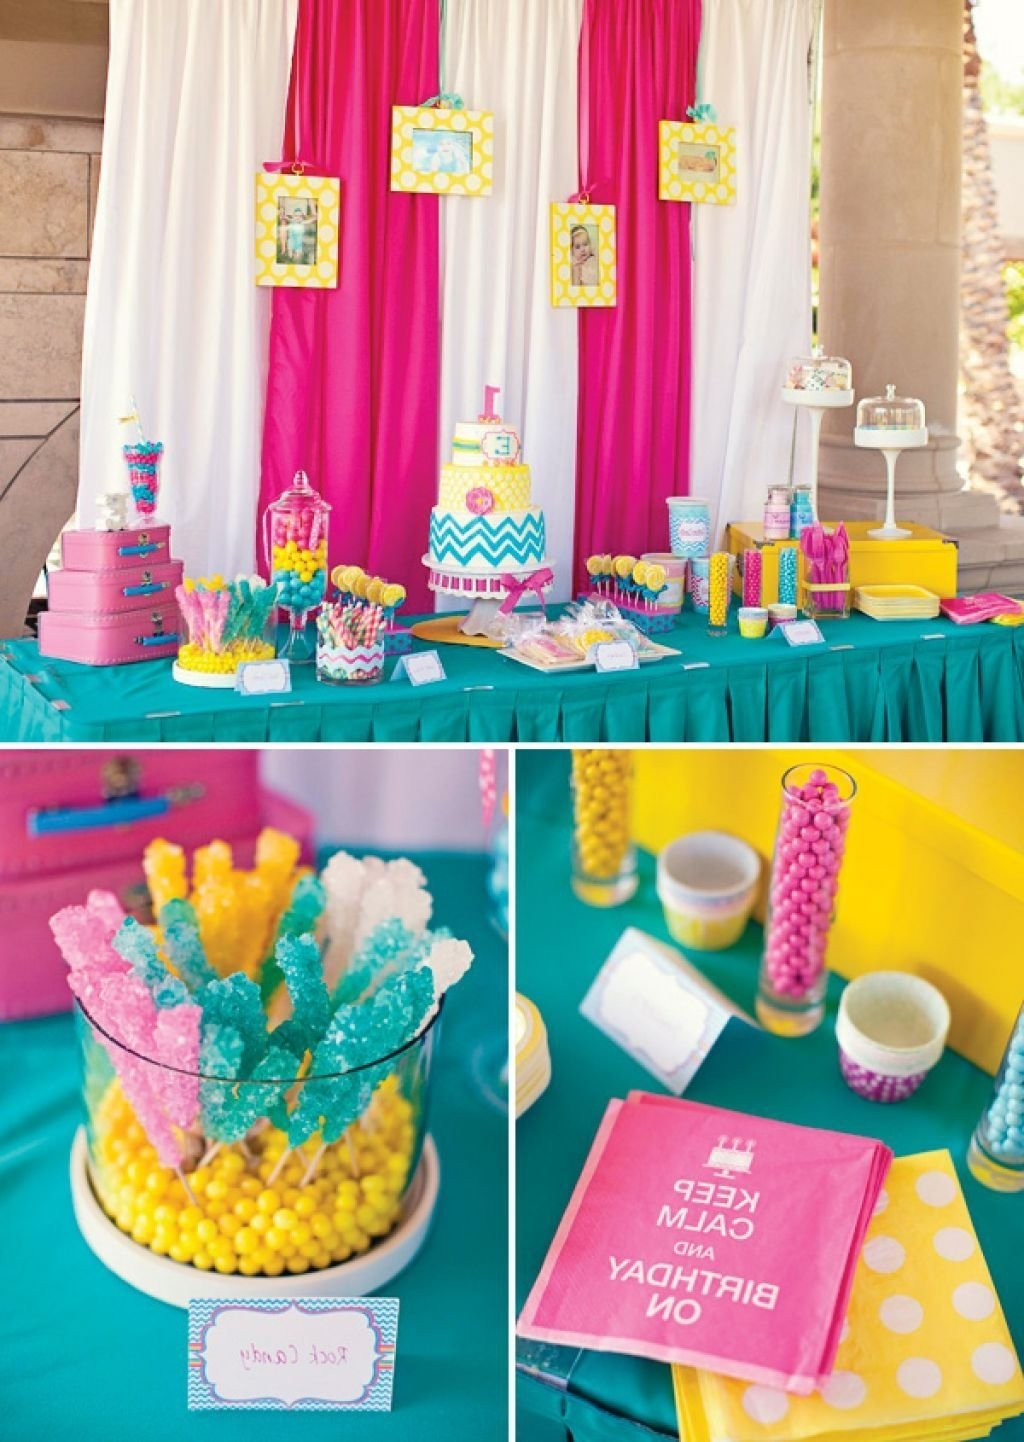 3 Year Old Birthday Party Ideas Pinterest
 10 Lovely Birthday Party Ideas For 3 Yr Old Girl 2019